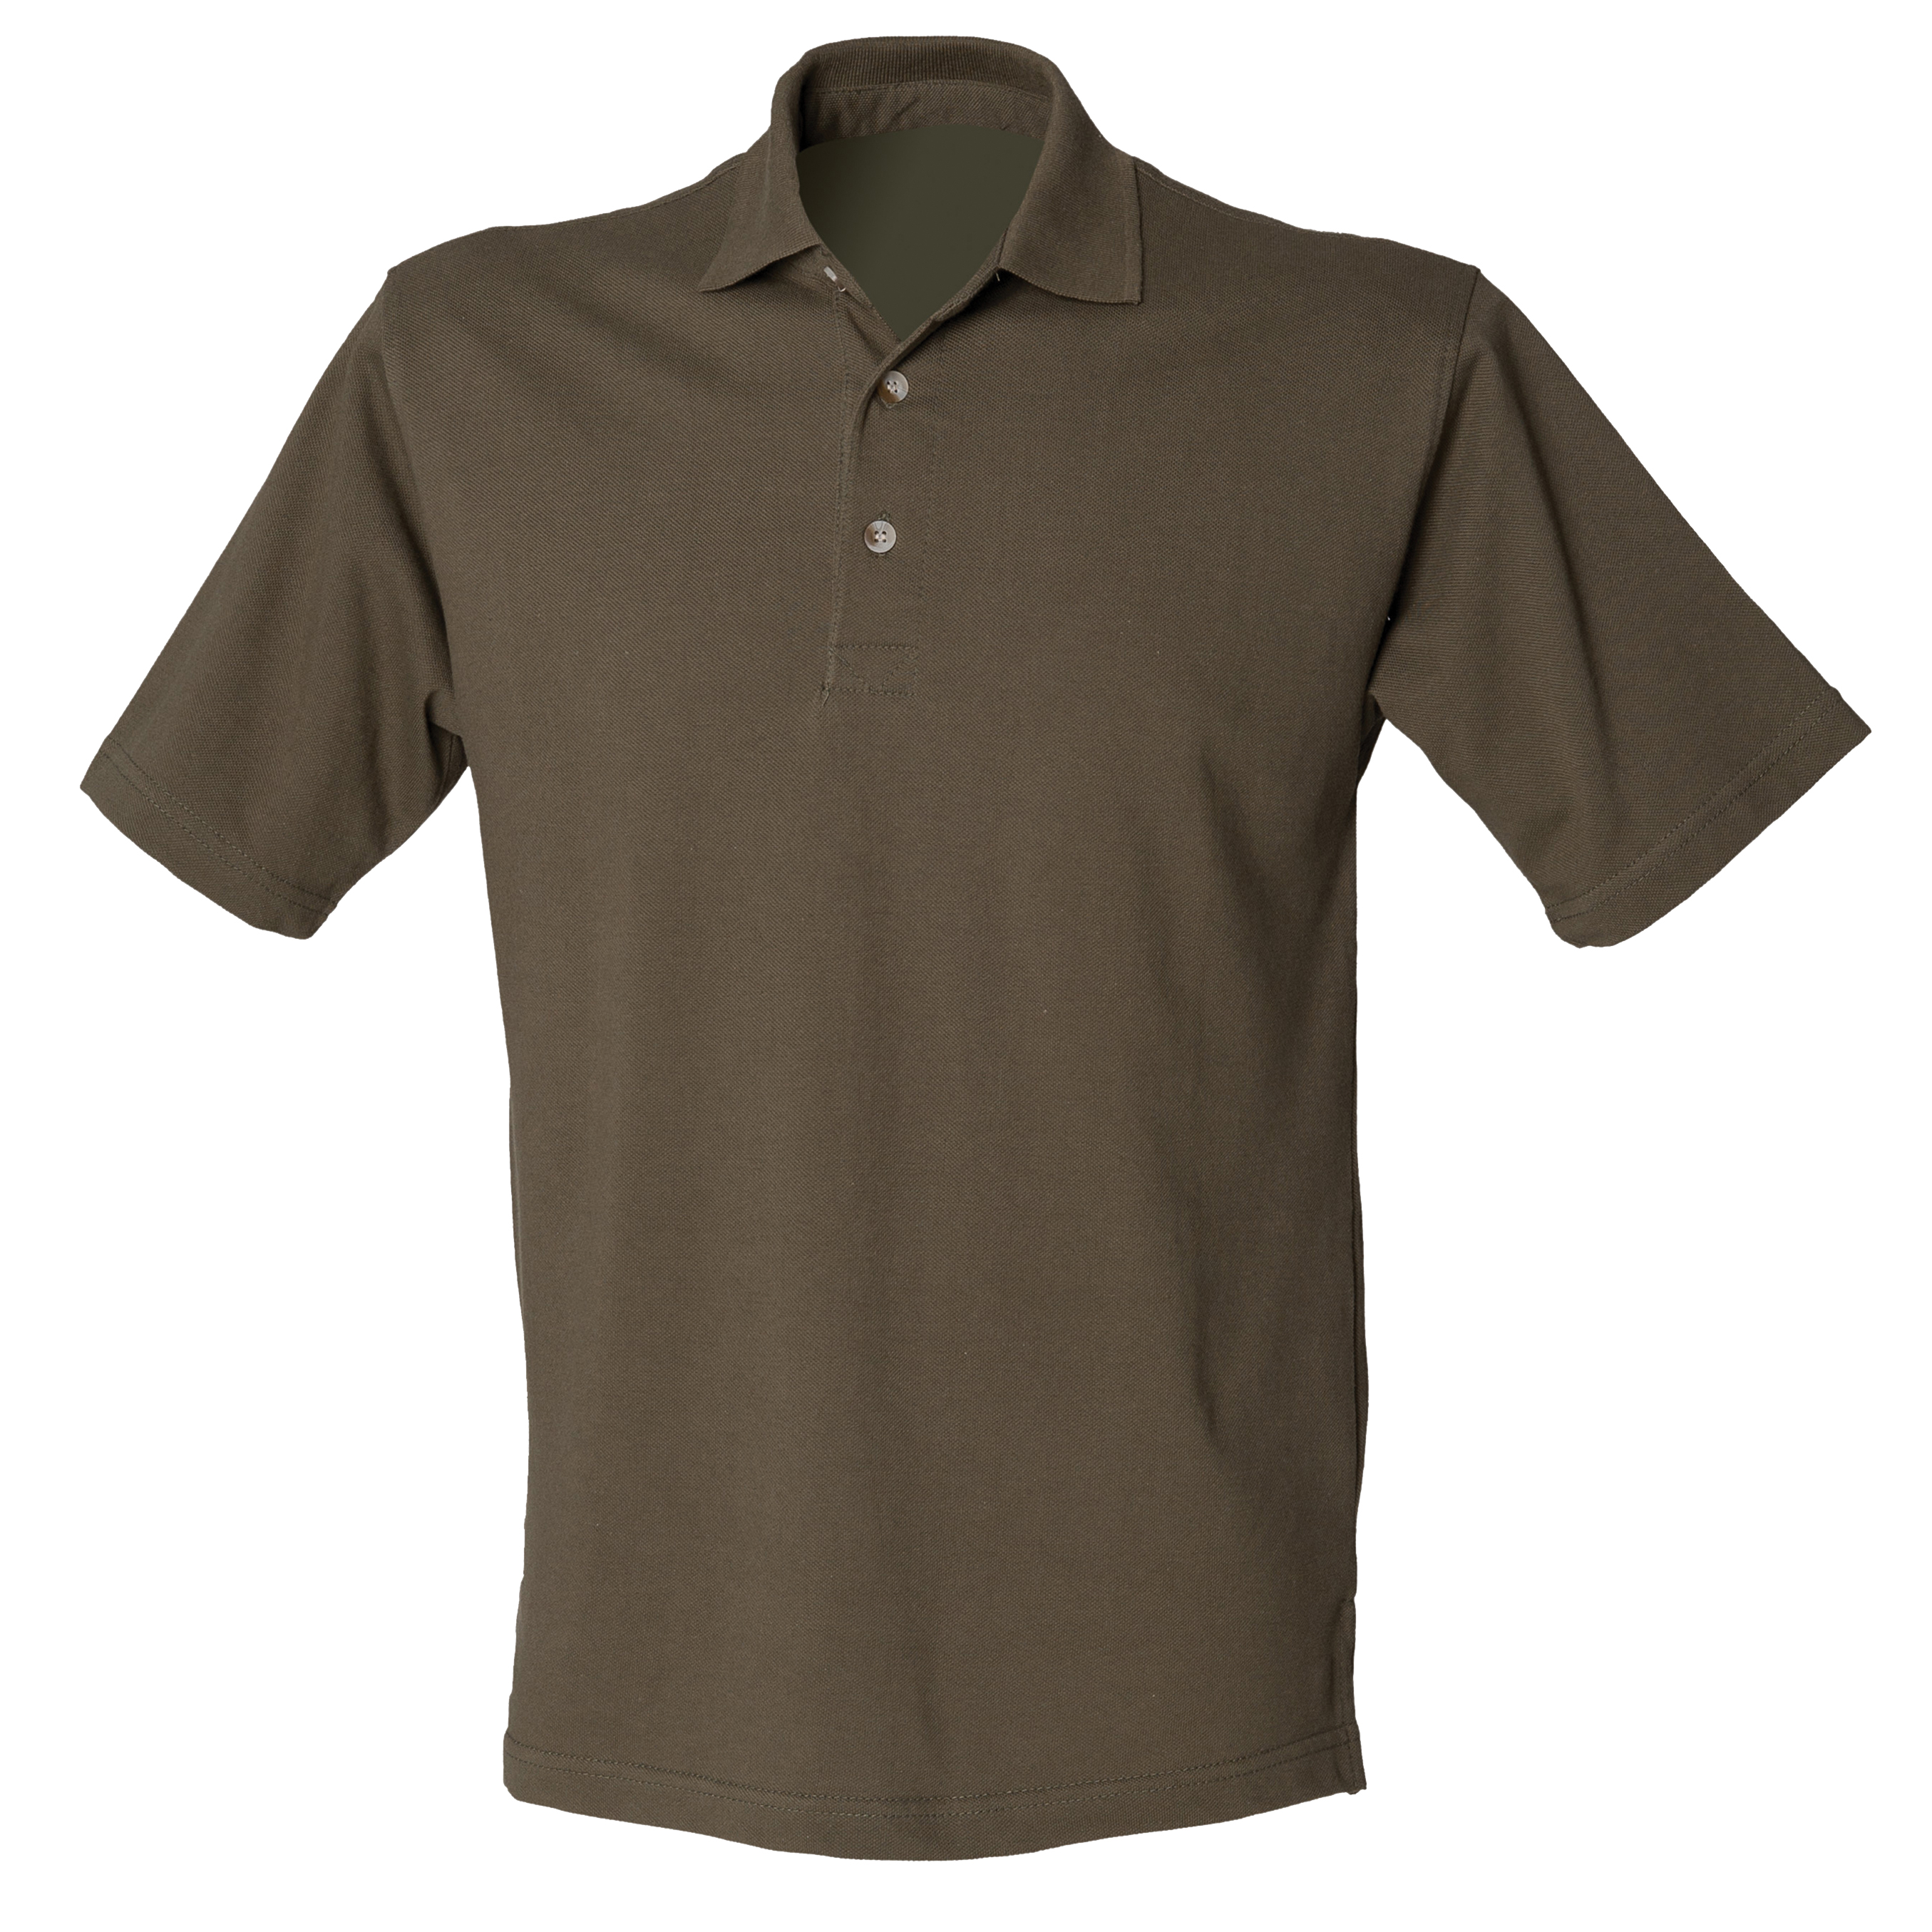 ax-httpswebsystems.s3.amazonaws.comtmp_for_downloadhenbury-classic-cotton-pique-polo-stand-up-olive.jpg